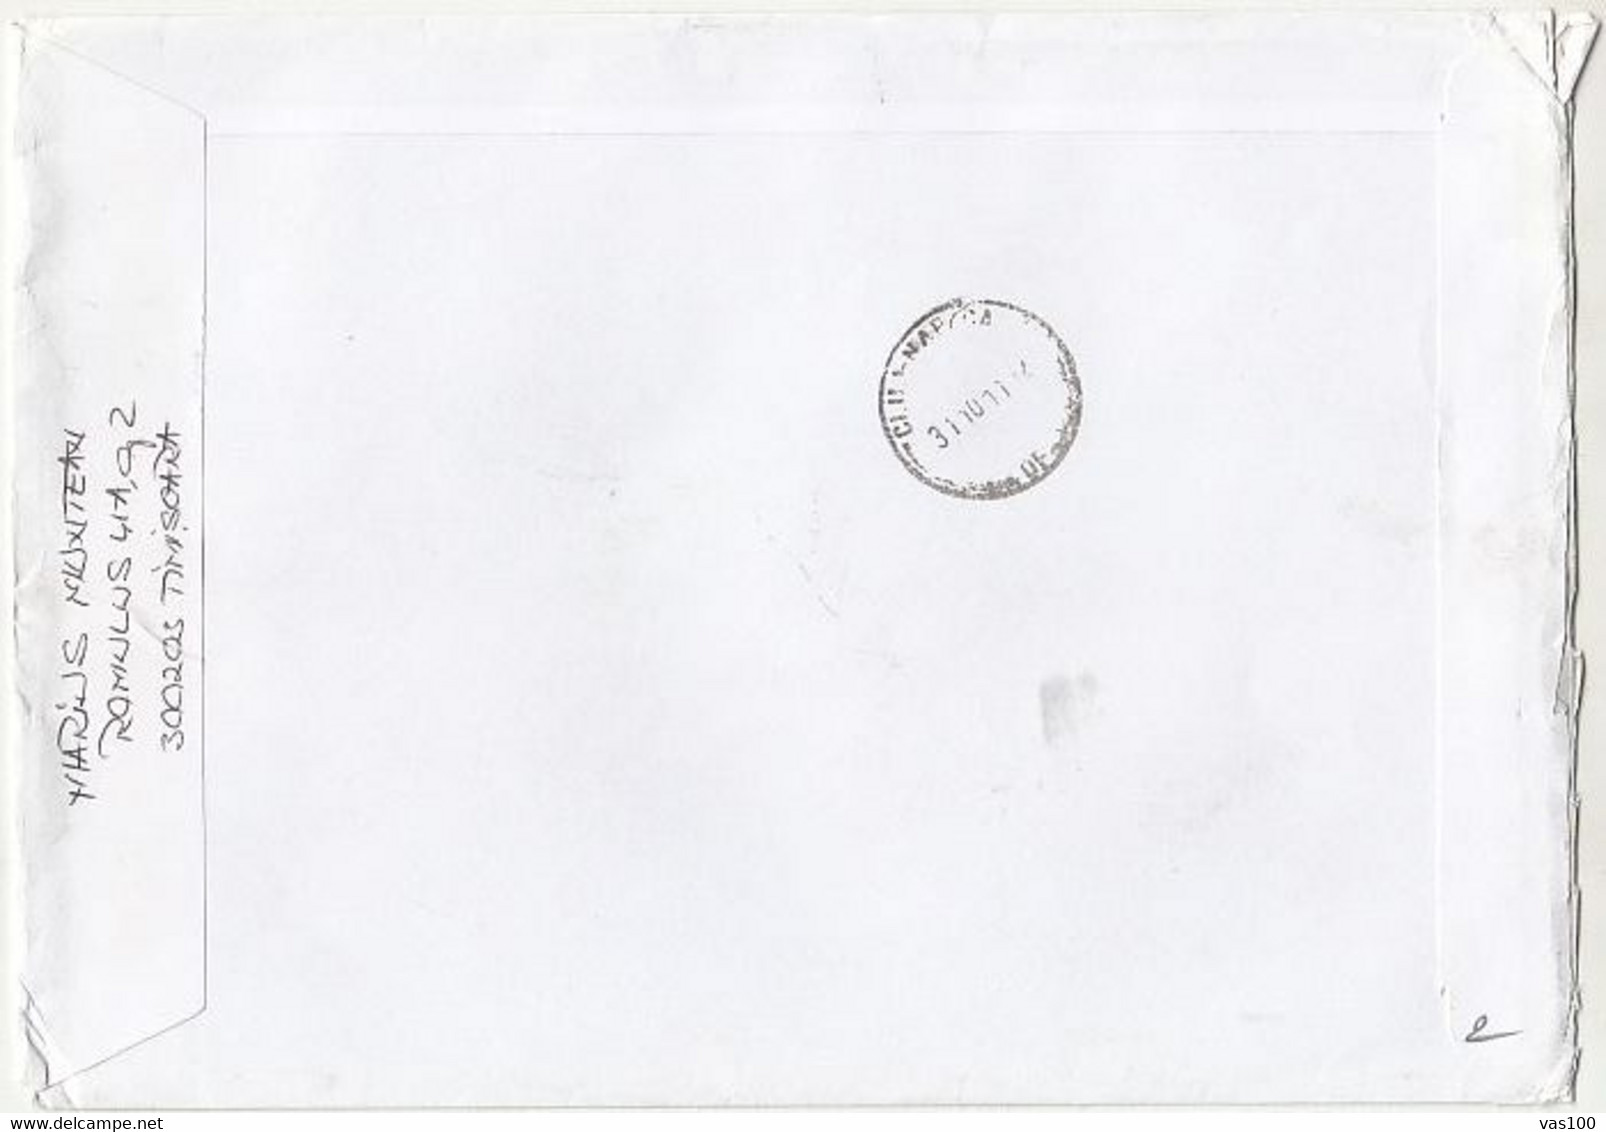 POTTERY, STAMPS ON REGISTERED COVER, 2011, ROMANIA - Storia Postale